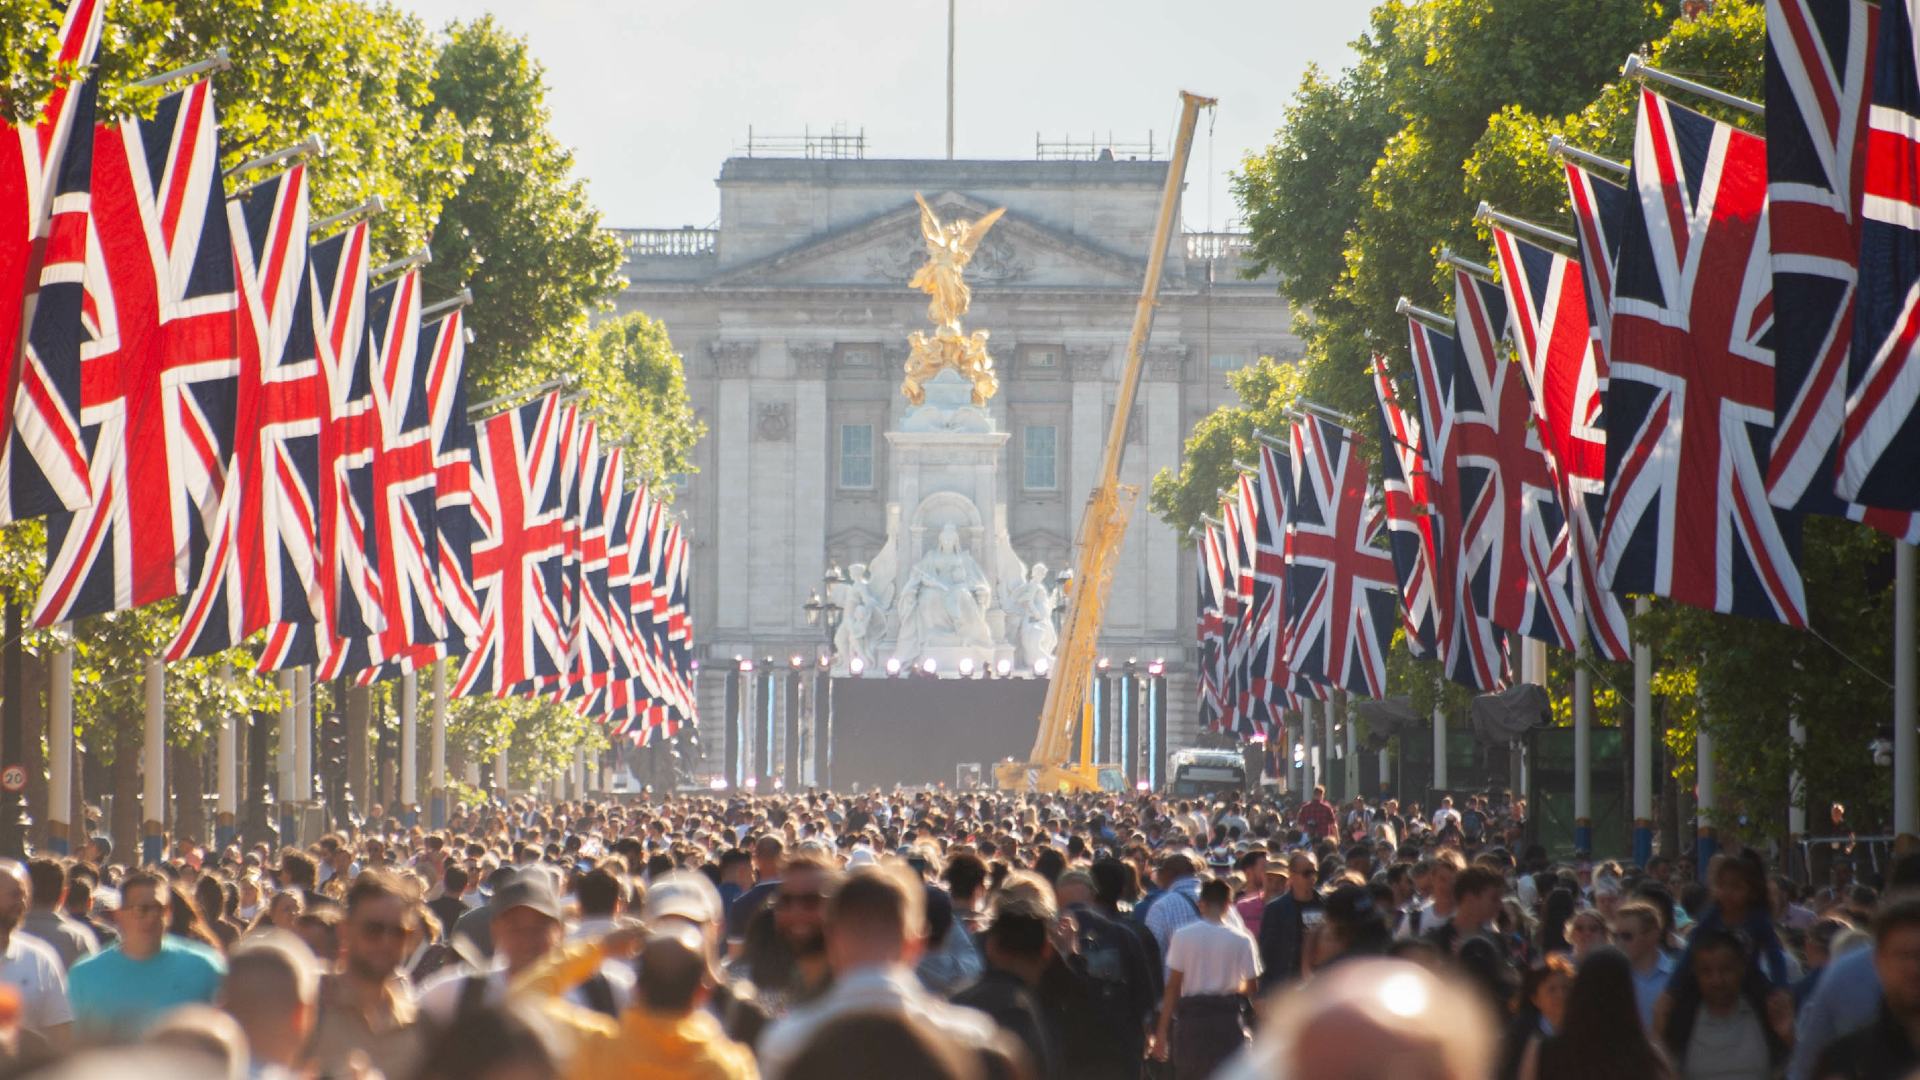 People gathred in London to celebrate the Queen's Jubilee